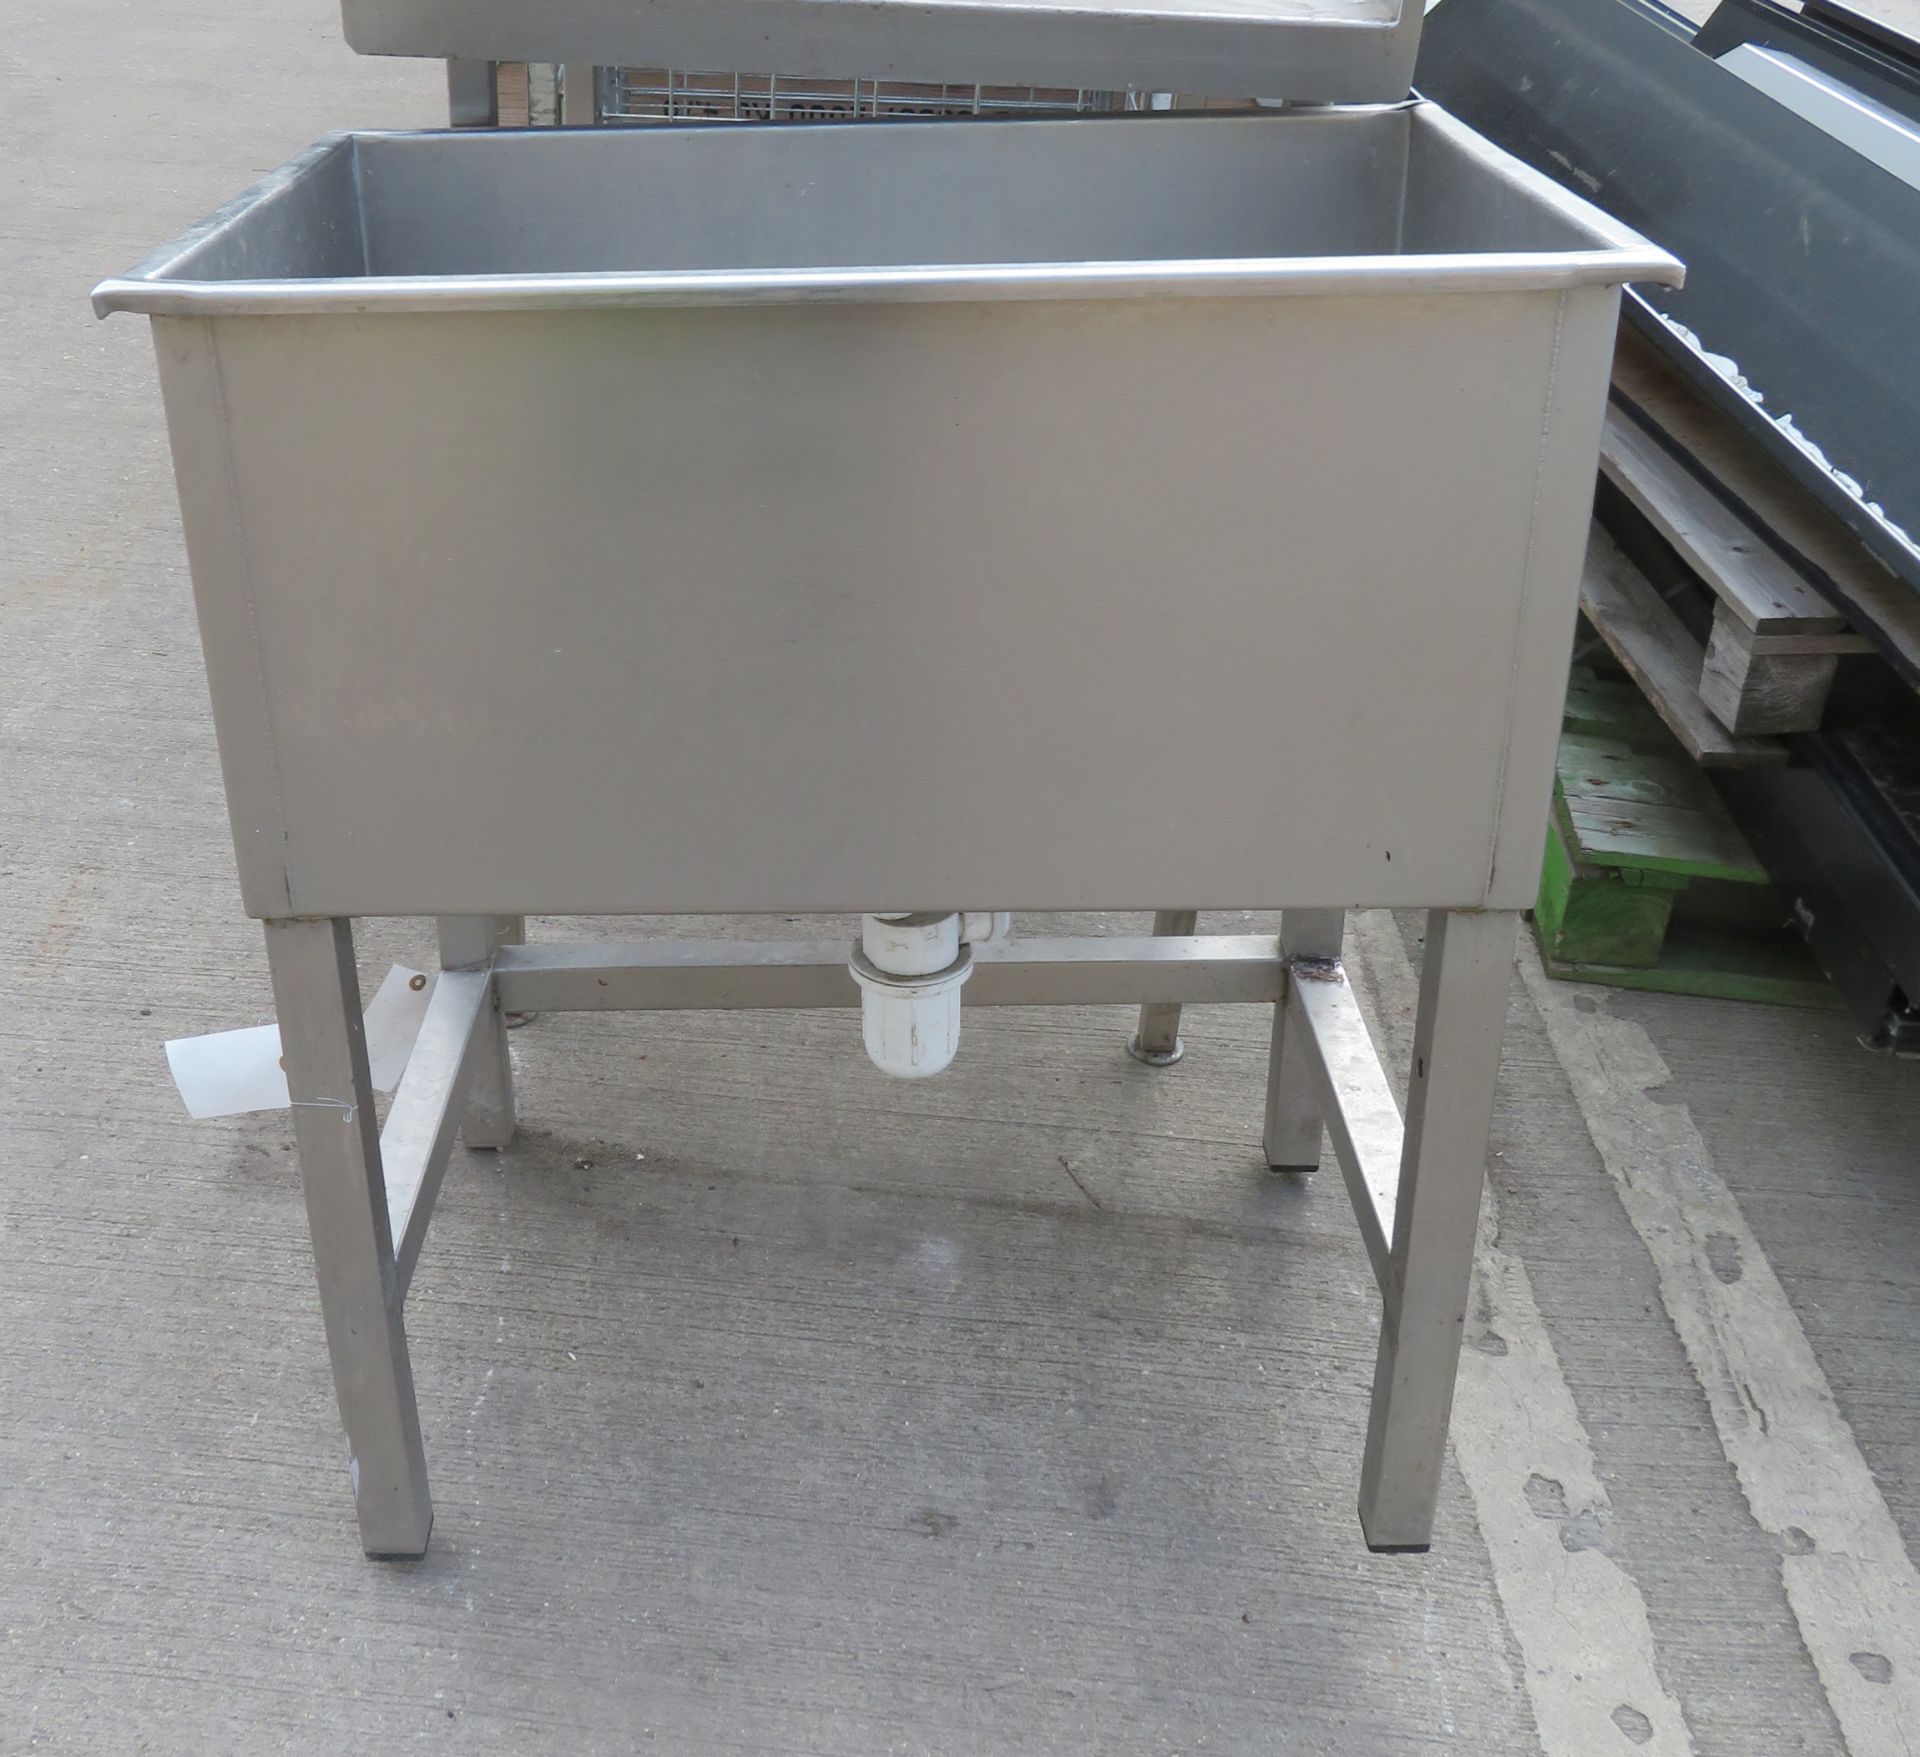 Stainless Steel Wash Station L 750 x W 510 x H 830mm - Image 3 of 3